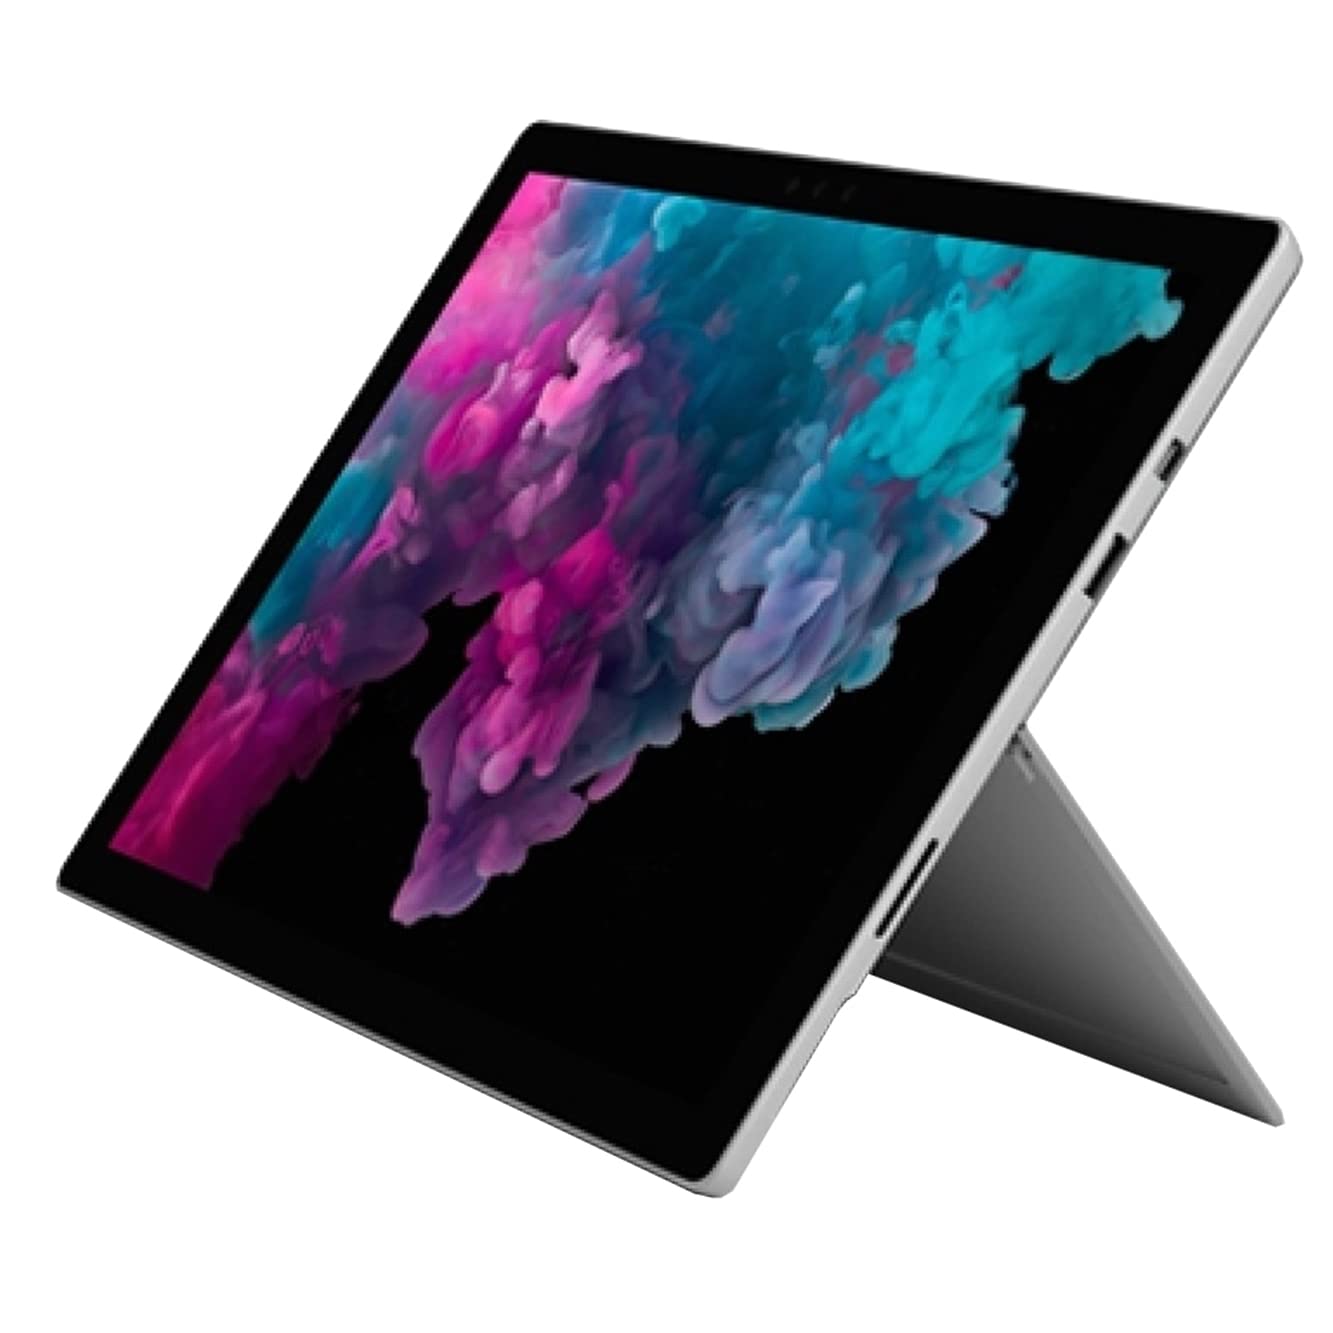 Microsoft Surface Pro 6 Tablet, 12.3" Display, 256GB WiFi, High-Performance Core i5-8250U 1.6GHz Processor, Surface Laptop Experience in a Versatile Tablet Design B09BKF7PVF (Renewed)